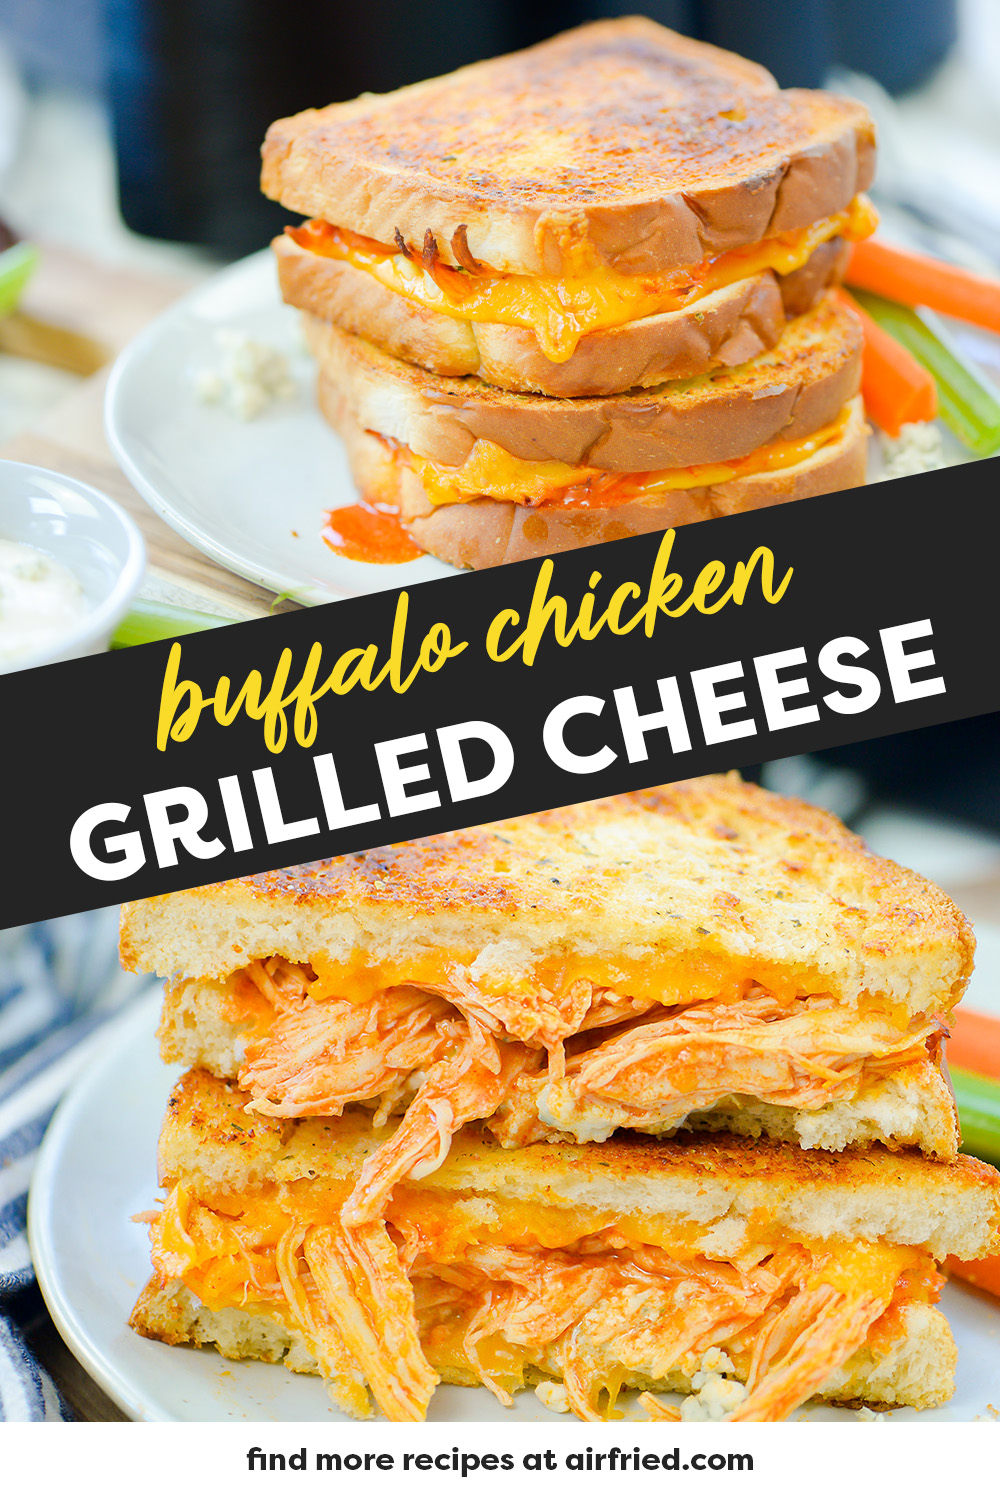 This buffalo chciken grilled cheese is a perfect blend of spice, chicken, and cheese on a sandwich!  You have to try this buffalo chicken grilled cheese recipe in your air fryer!